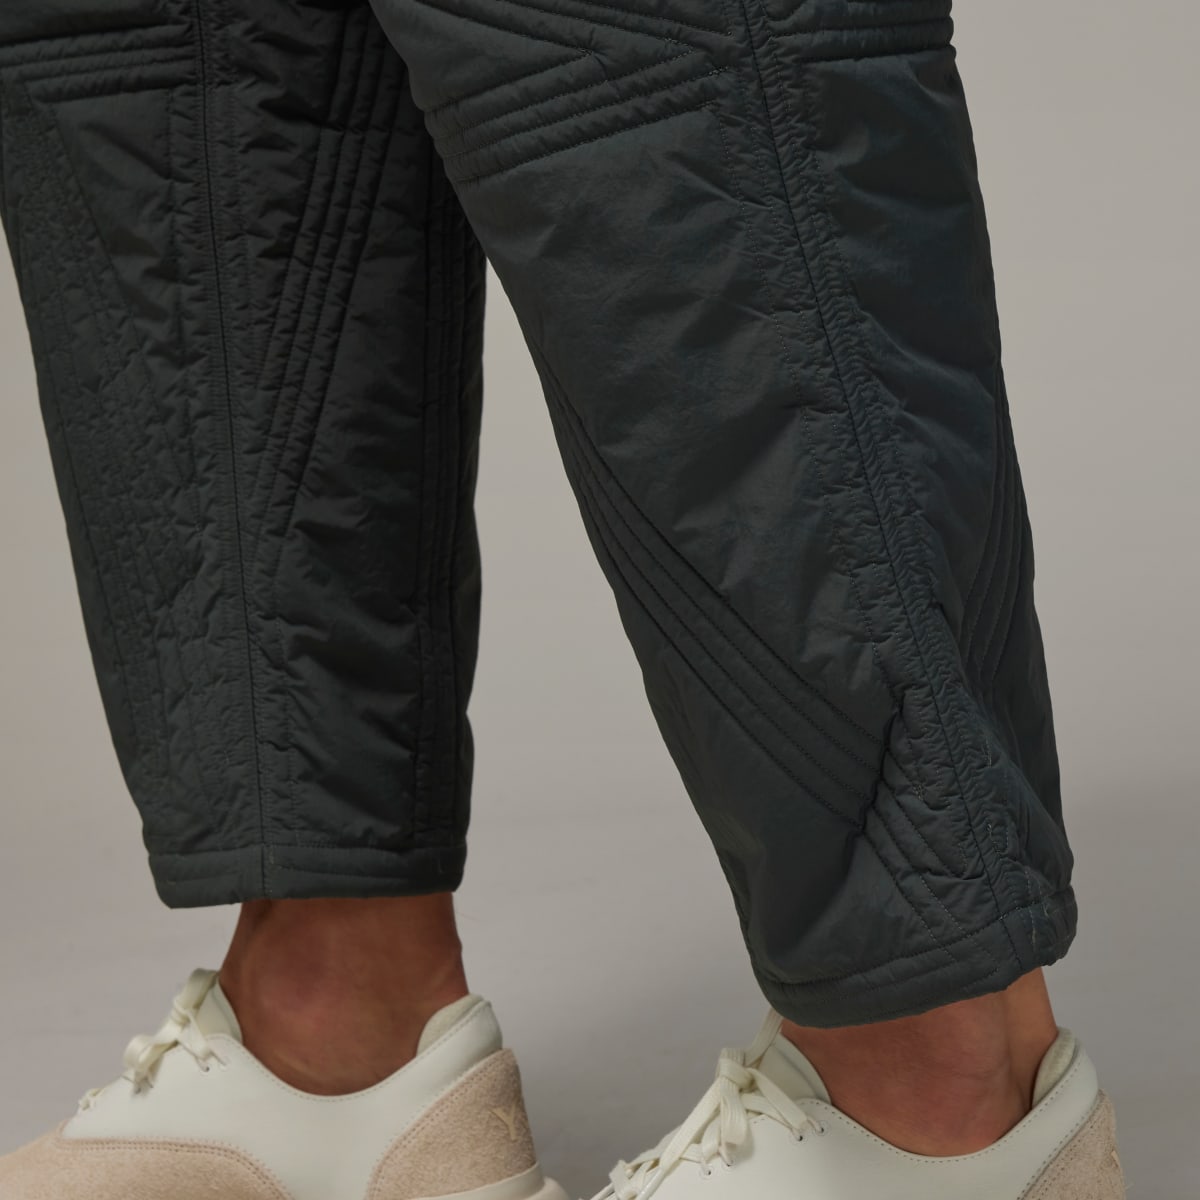 Adidas Y-3 Quilted Pants. 8